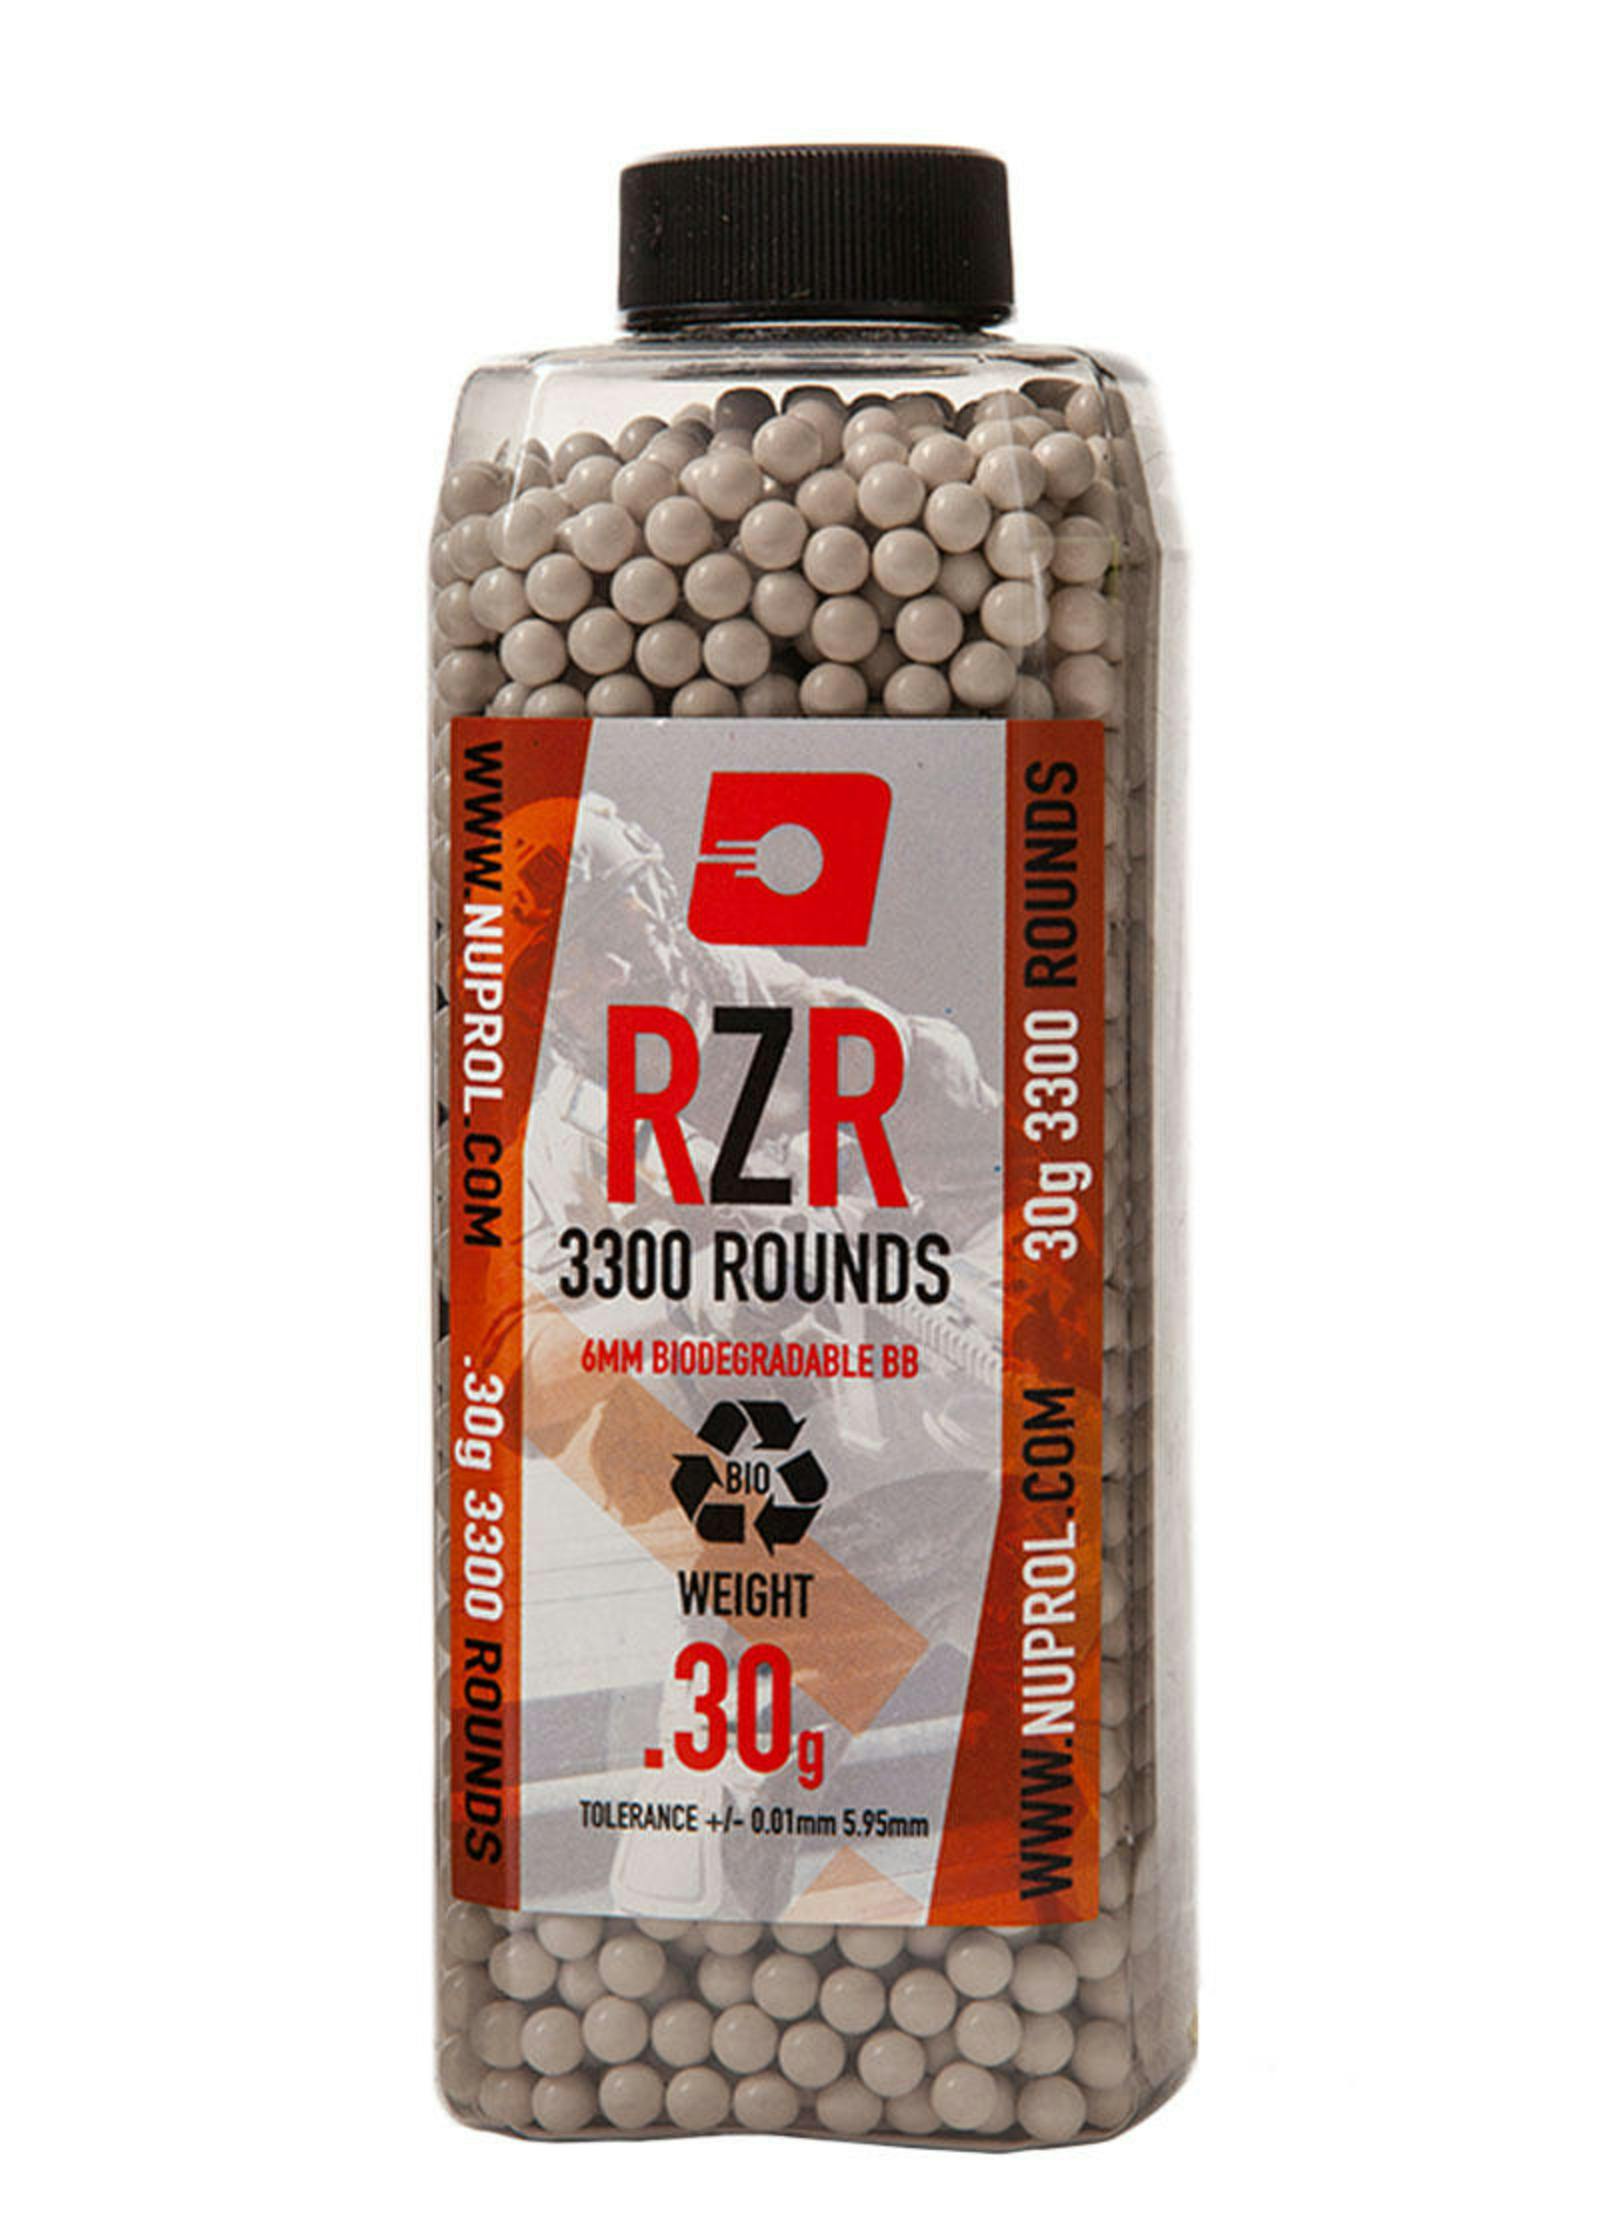 Brand New Nuprol RZR 0.20g BBs 3300 Rounds Airsoft Pellets BB